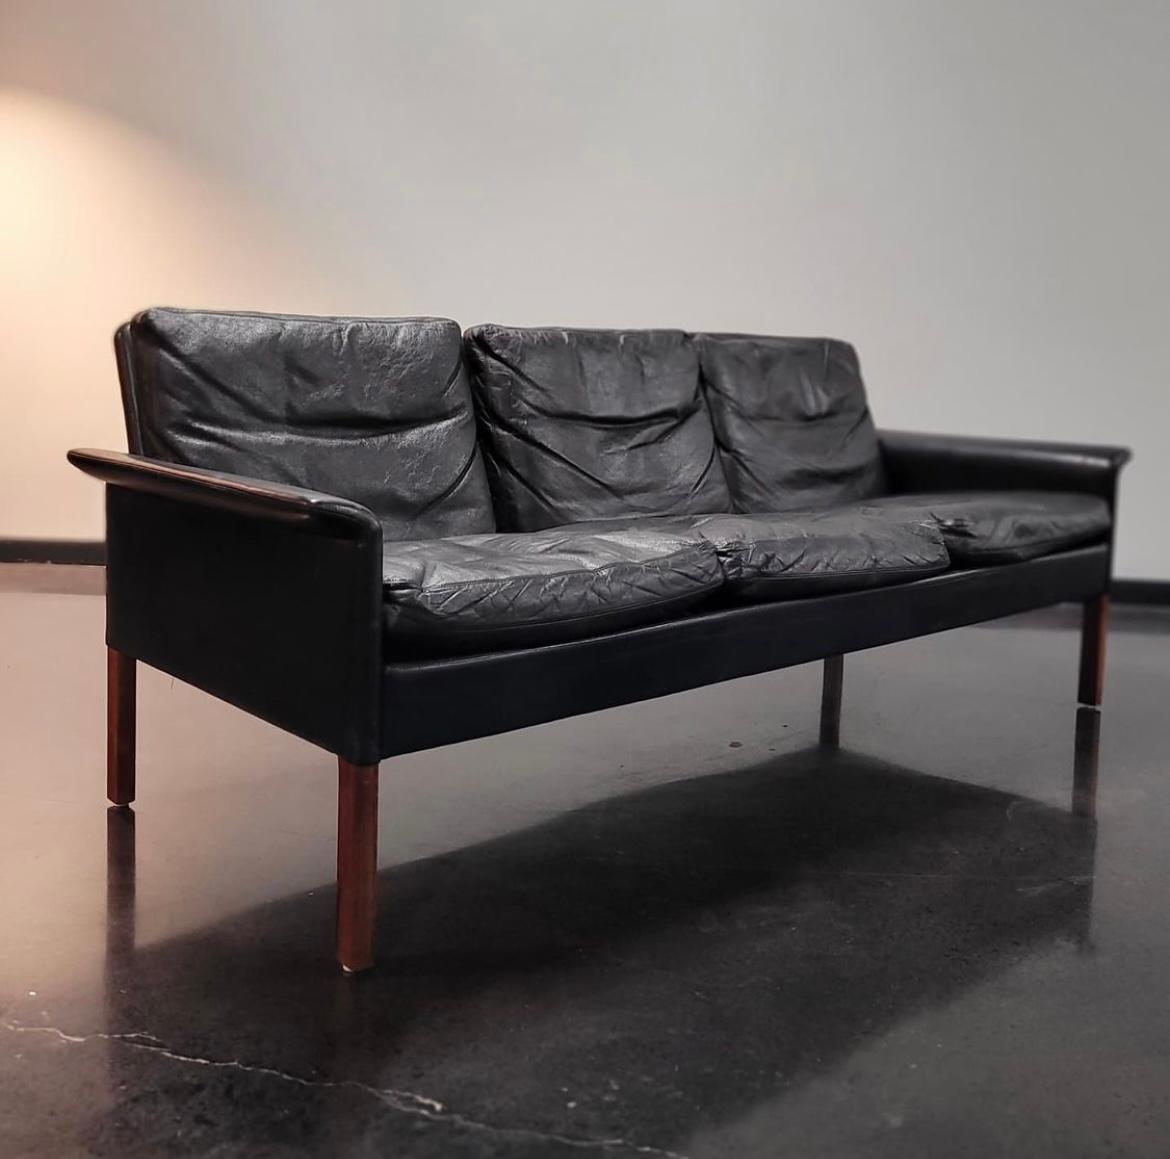 Beautiful 1960s Danish MCM leather sofa by Hans Olsen for Christian Sorensen. Removable cushions.